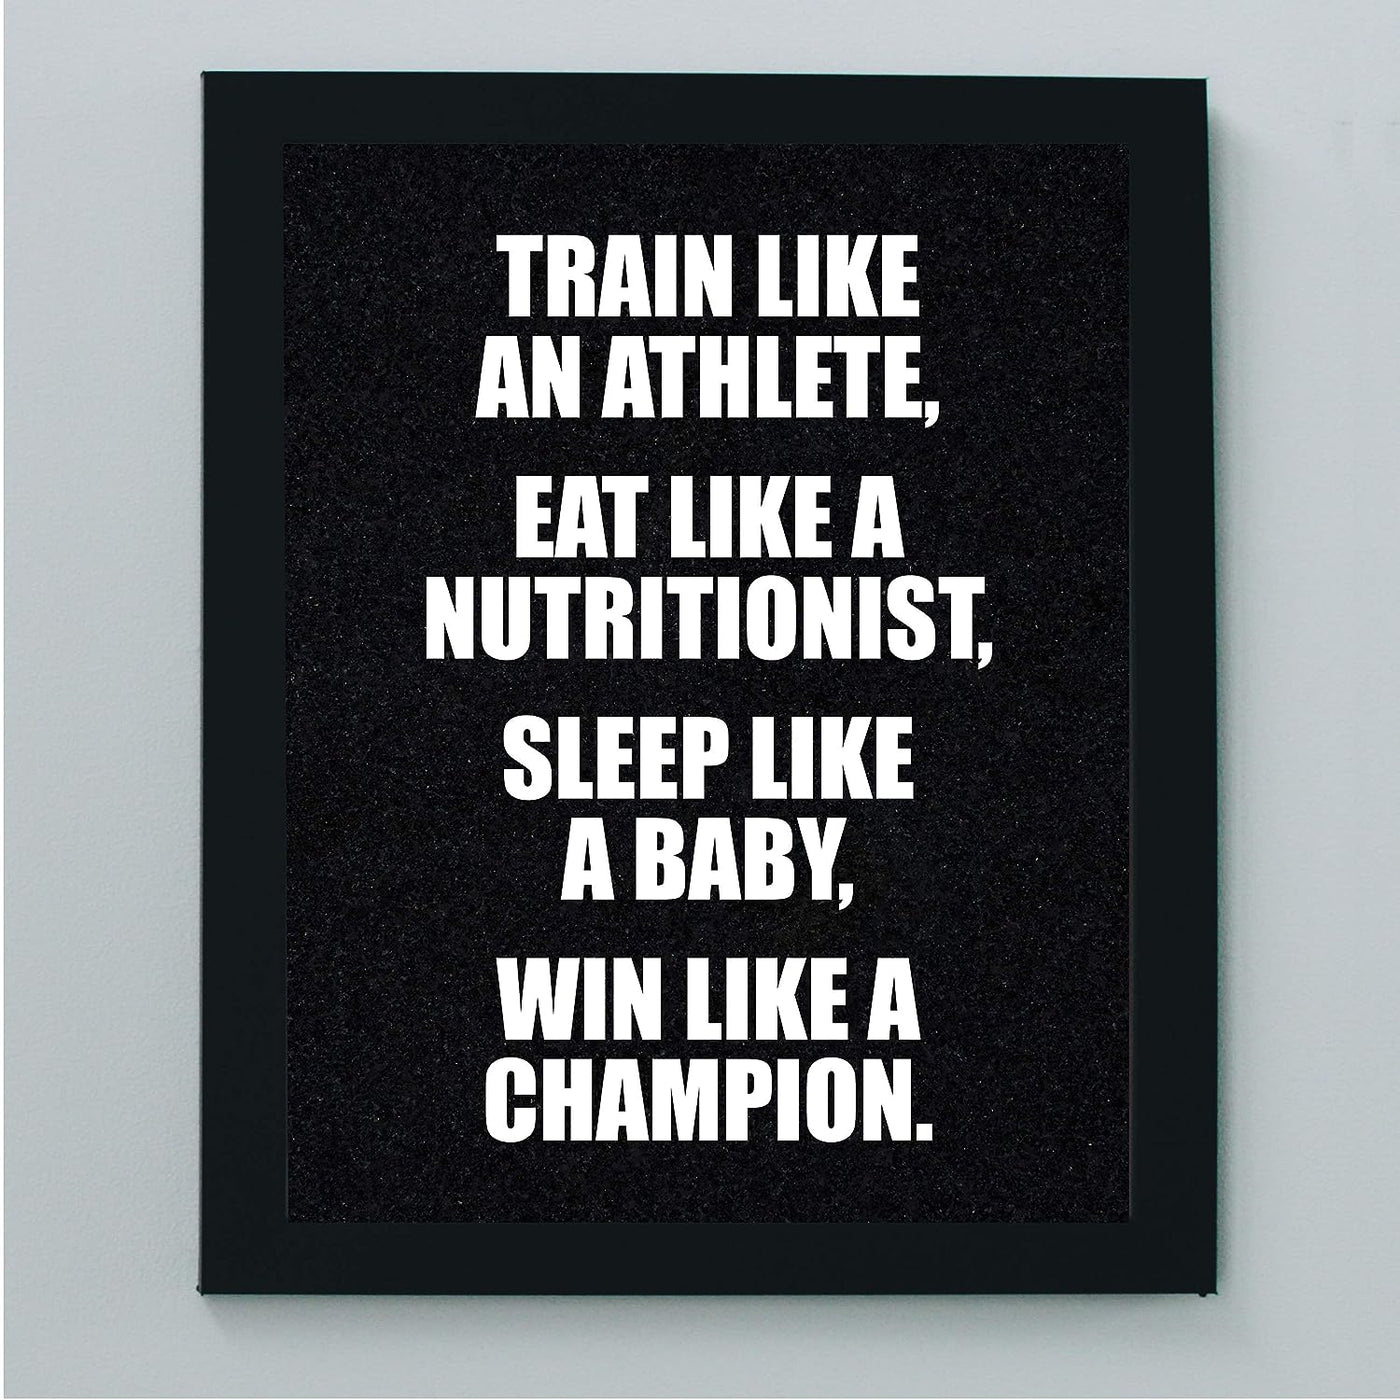 ?Win Like A Champion?-Motivational Gym Quotes -8 x 10" Exercise and Fitness Wall Art Print-Ready to Frame. Modern Typographic Design. Home-Office-Locker Room Decor. Perfect Sign for Motivation!